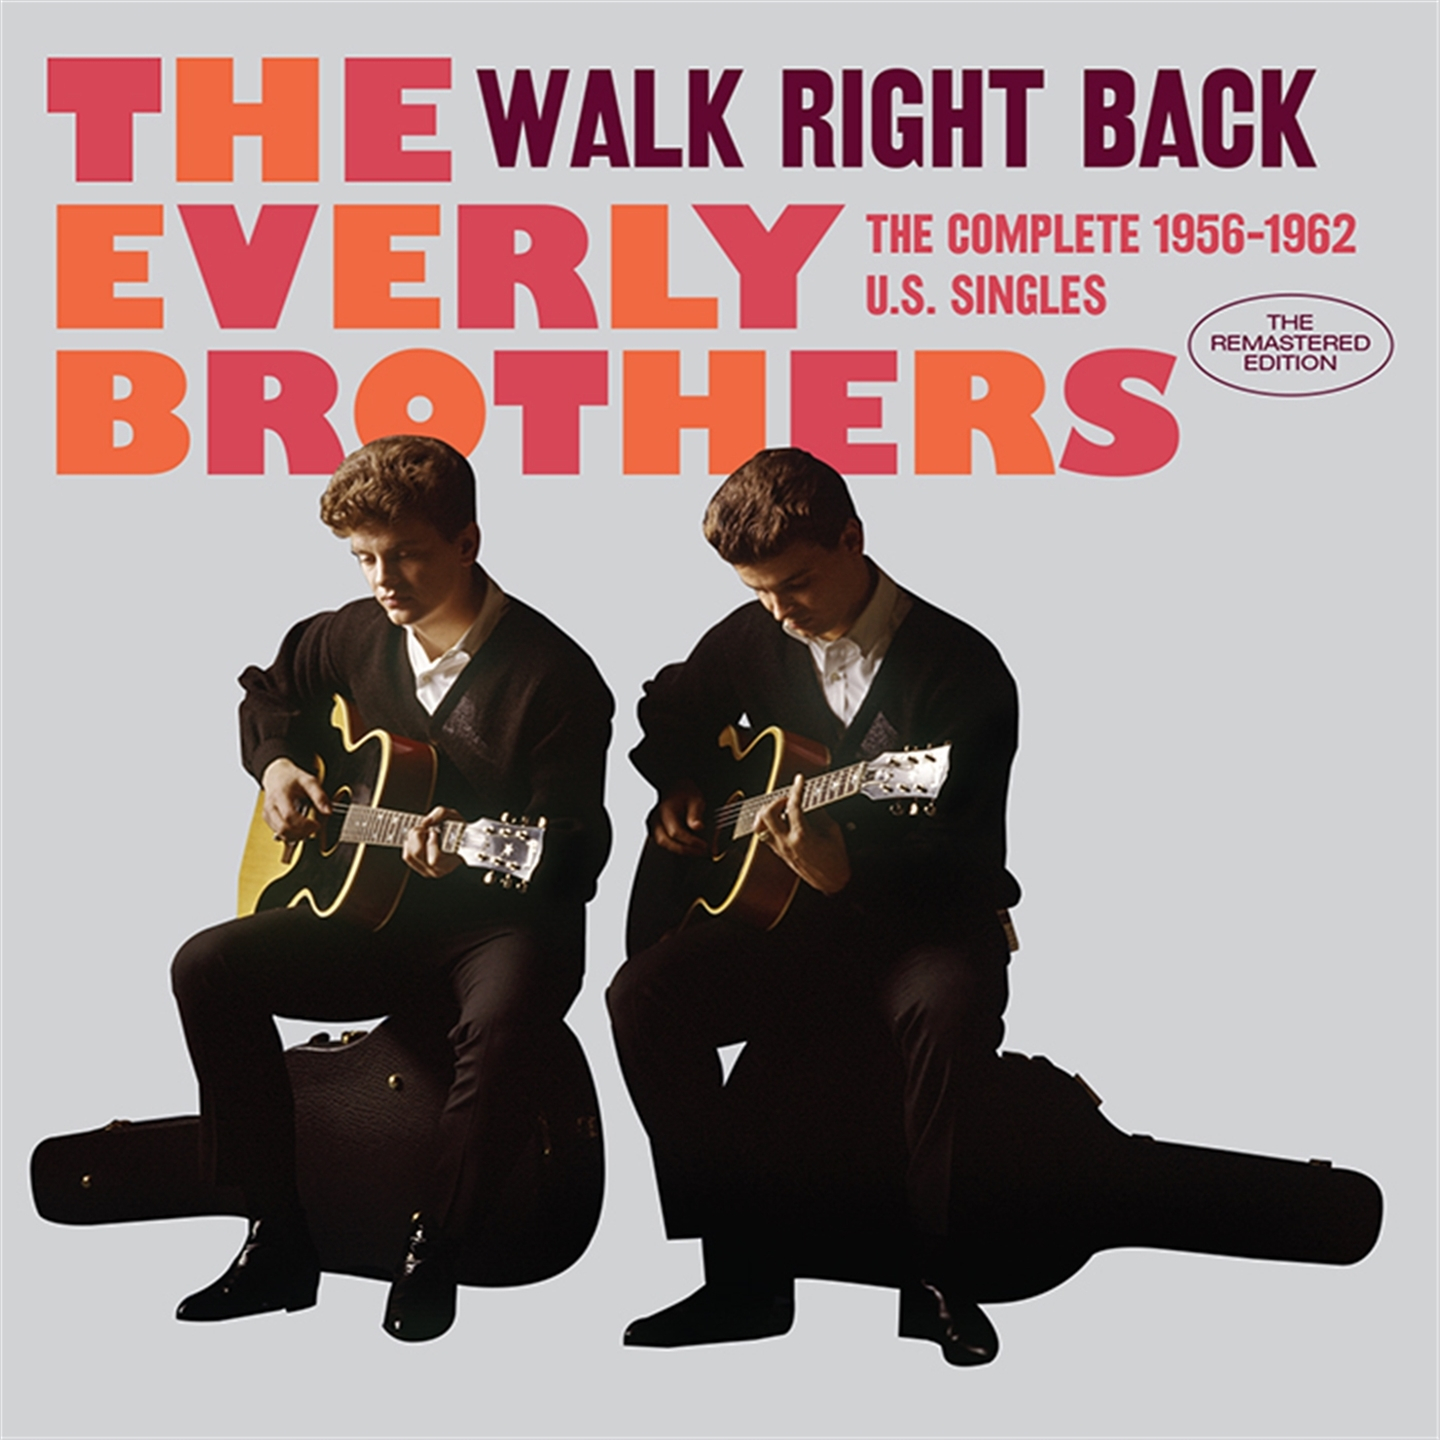 WALK RIGHT BACK - THE COMPLETE 1956-1962 US SINGLES